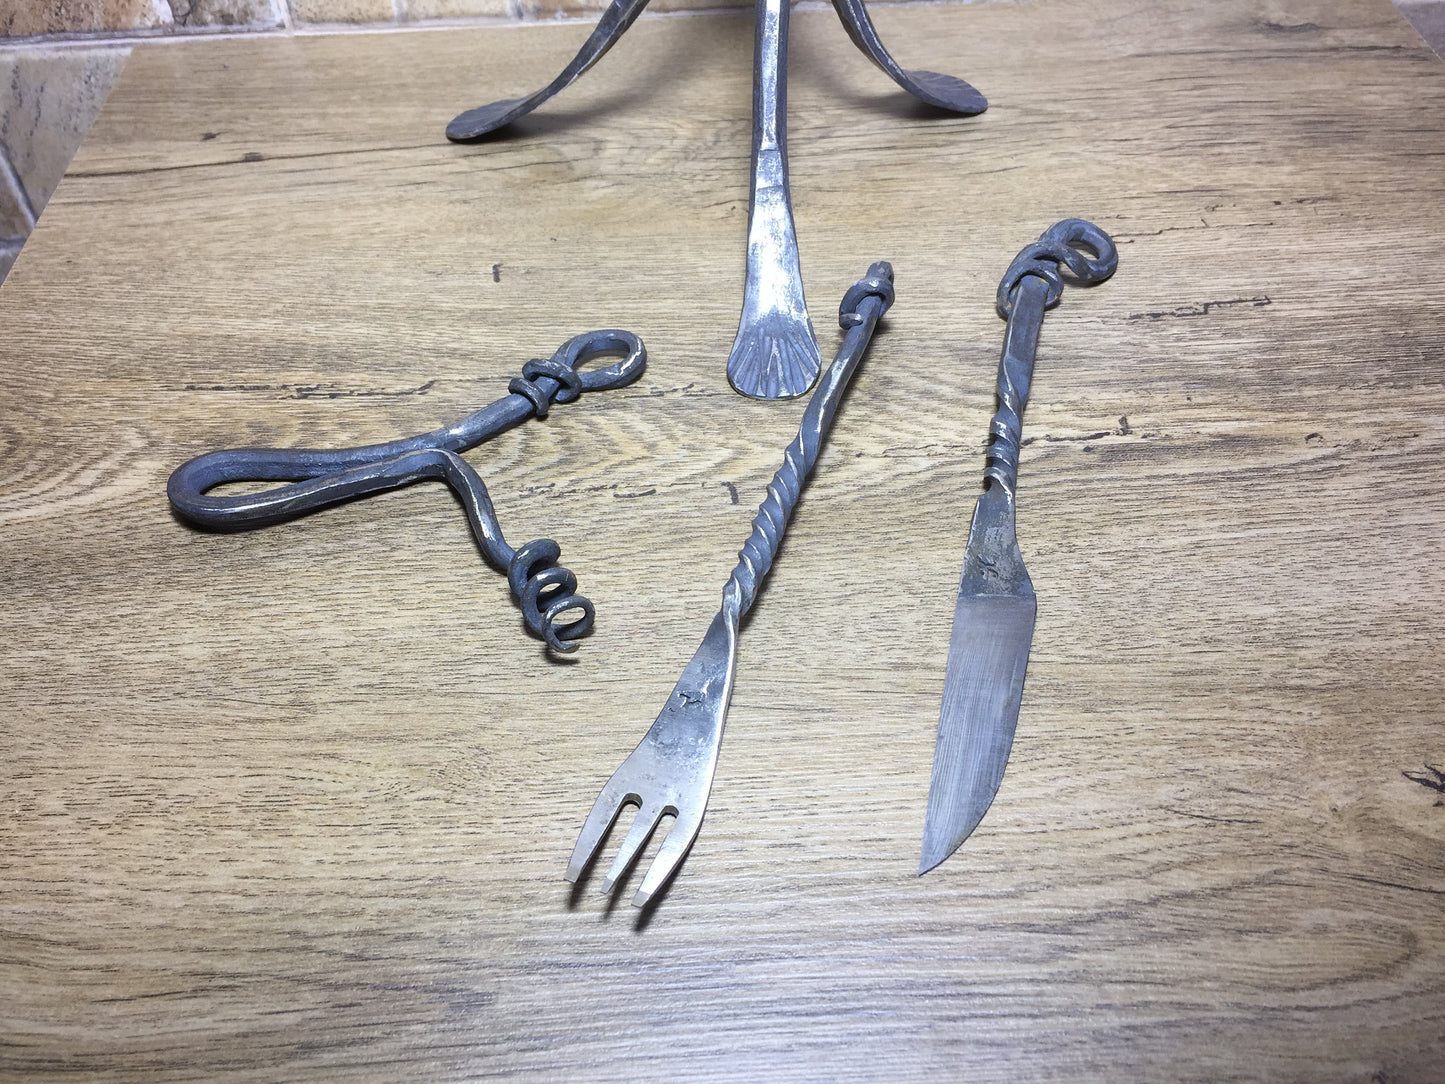 Stainless steel hand forged medieval cutlery set,middle ages cutlery,flatware set,camp equipment,forged cutlery,forged flatware,forged knife